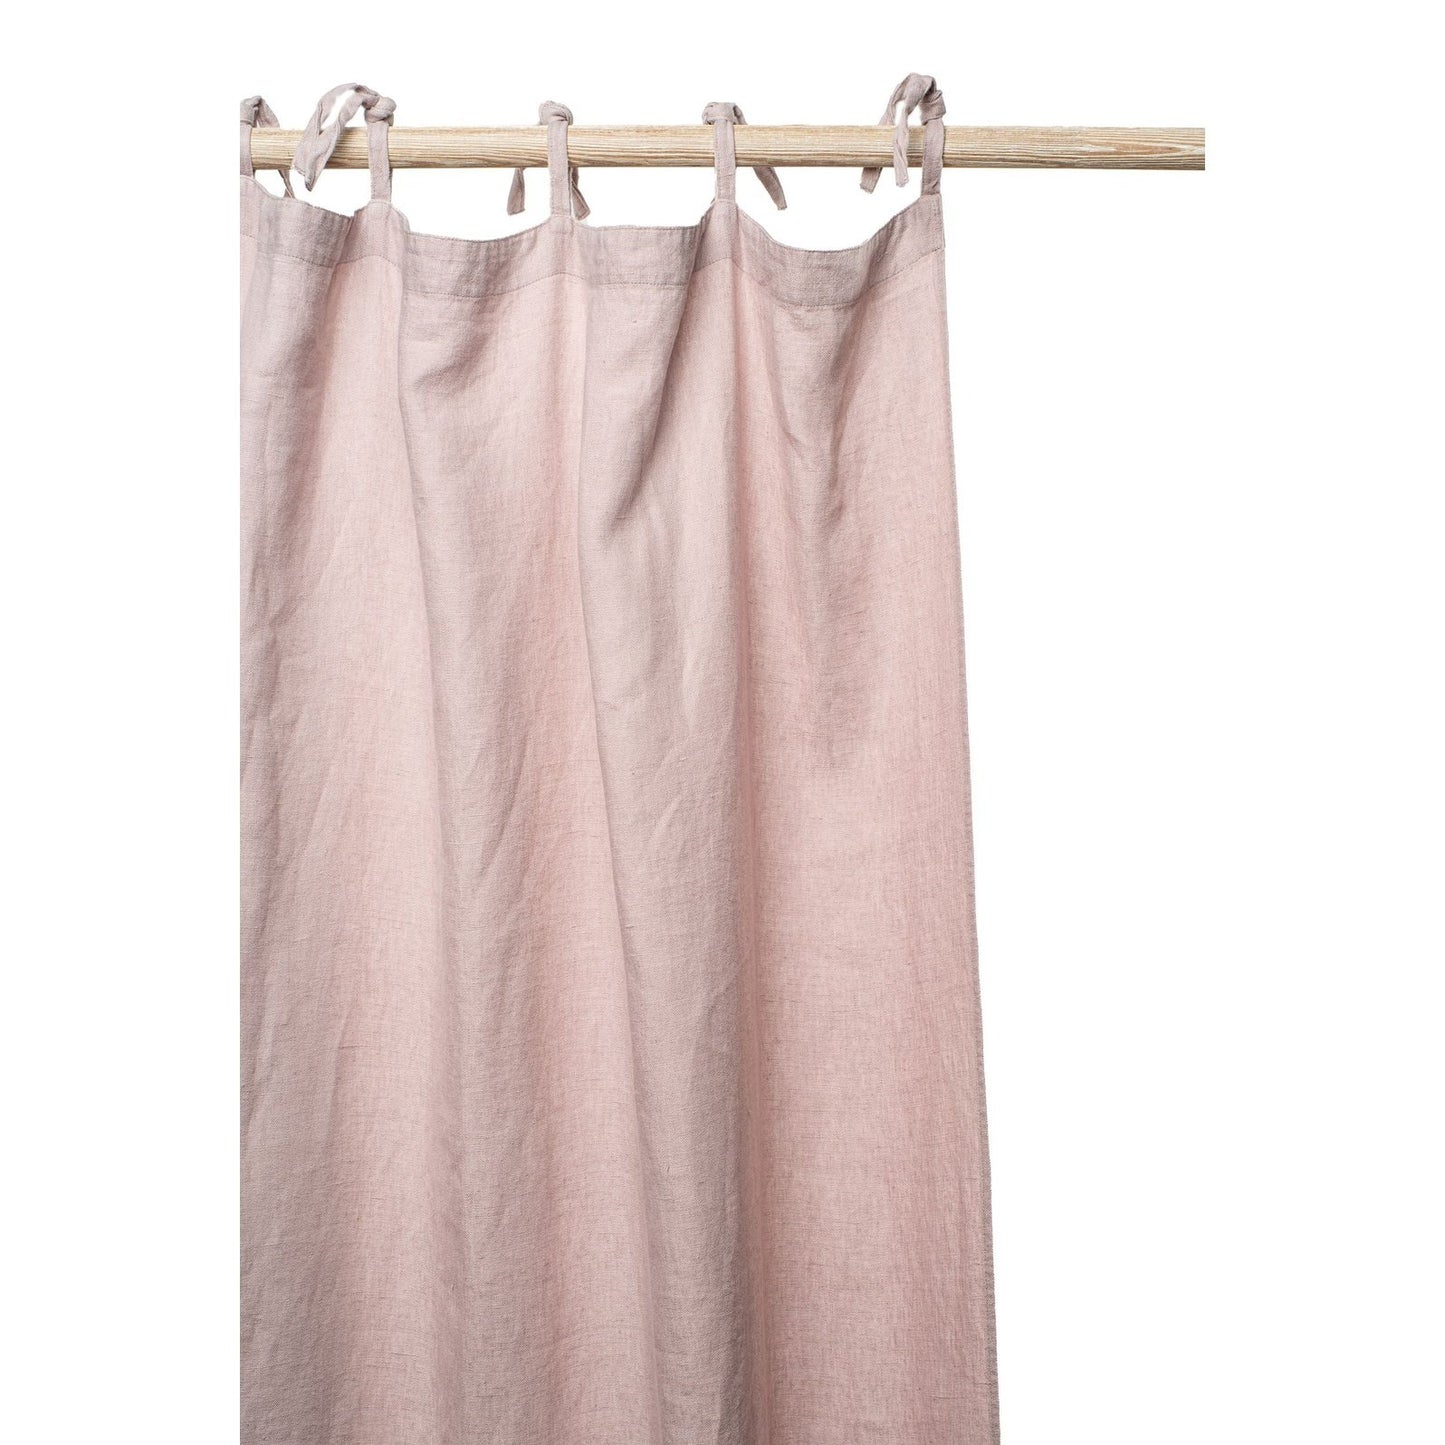 Our Emma linen curtain has become a staple in everyone’s collection. This versatile high-quality washed linen can be endlessly combined. In a timeless way or a more charming way combined with our lace curtains. This nice size 160x280cm curtain is machine washable and has 0% shrinkage!